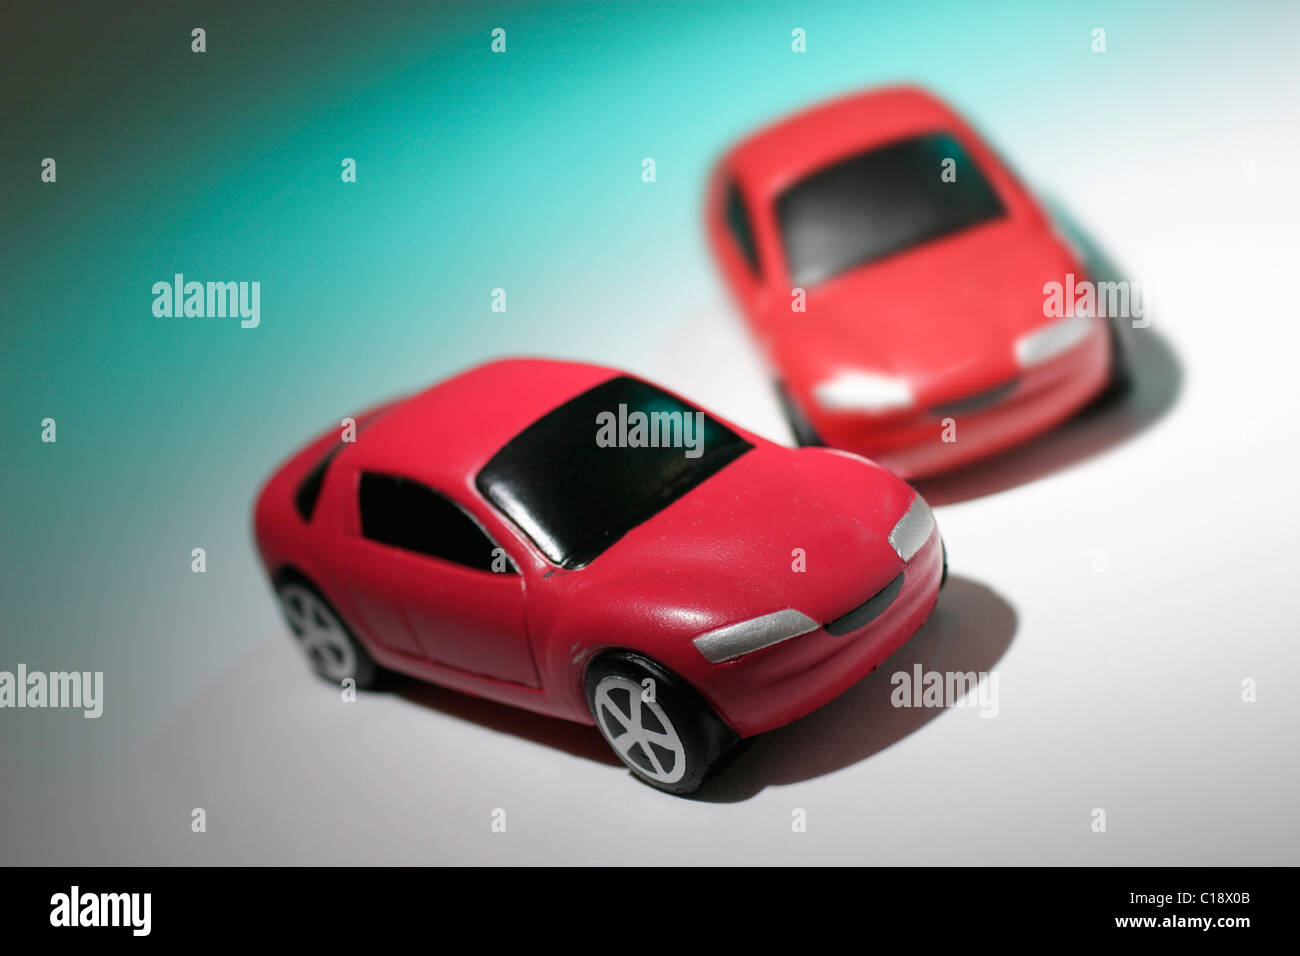 Red toy cars Stock Photo